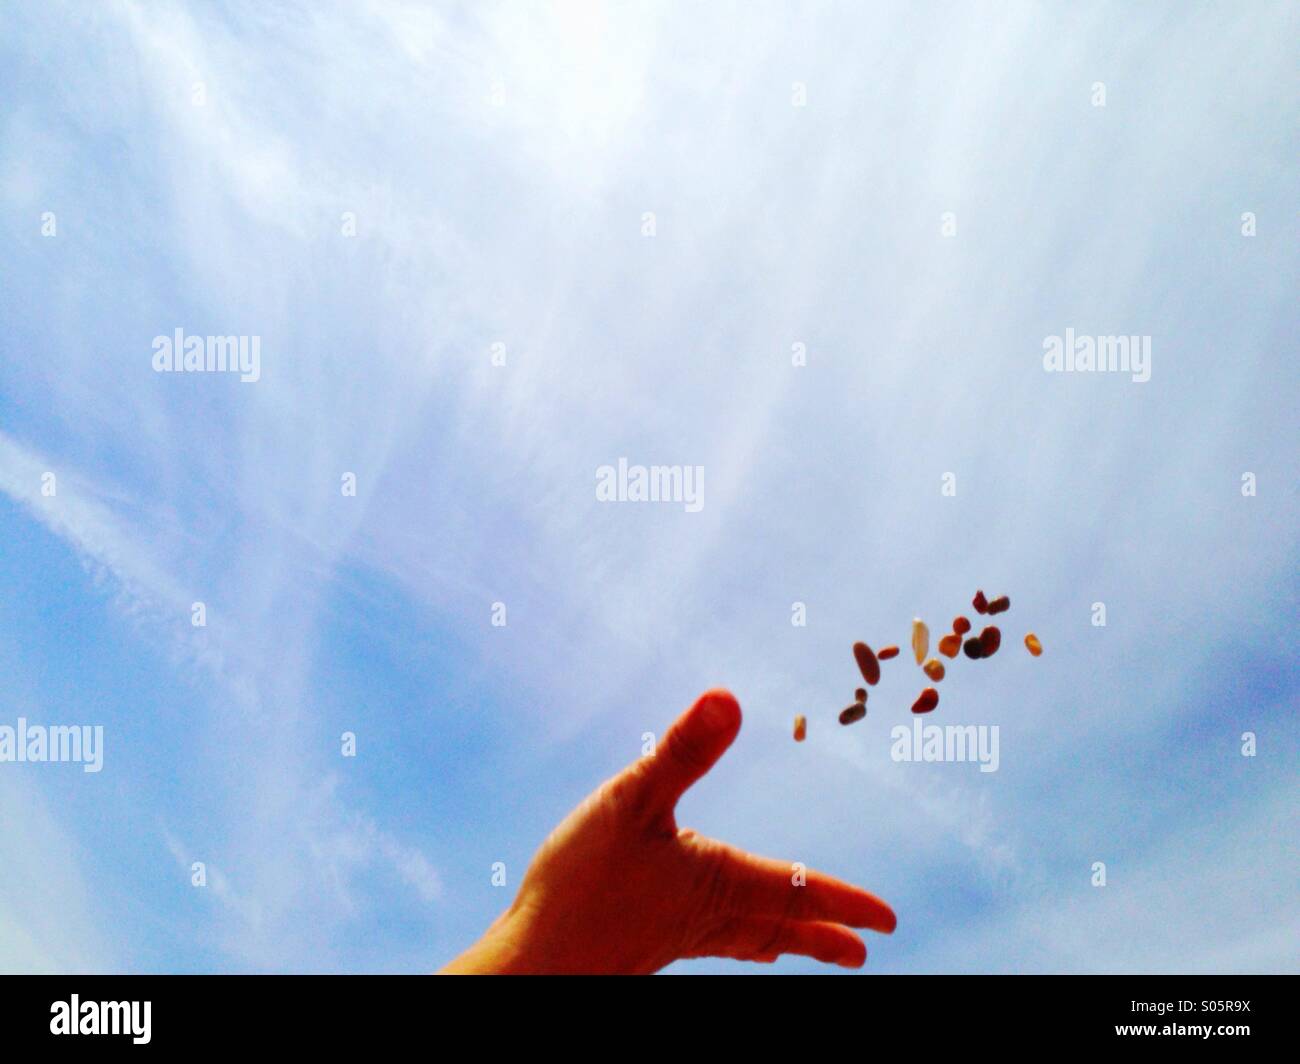 Throwing a handful of shingle on a hot, sunny beach to see what you can catch. Stock Photo